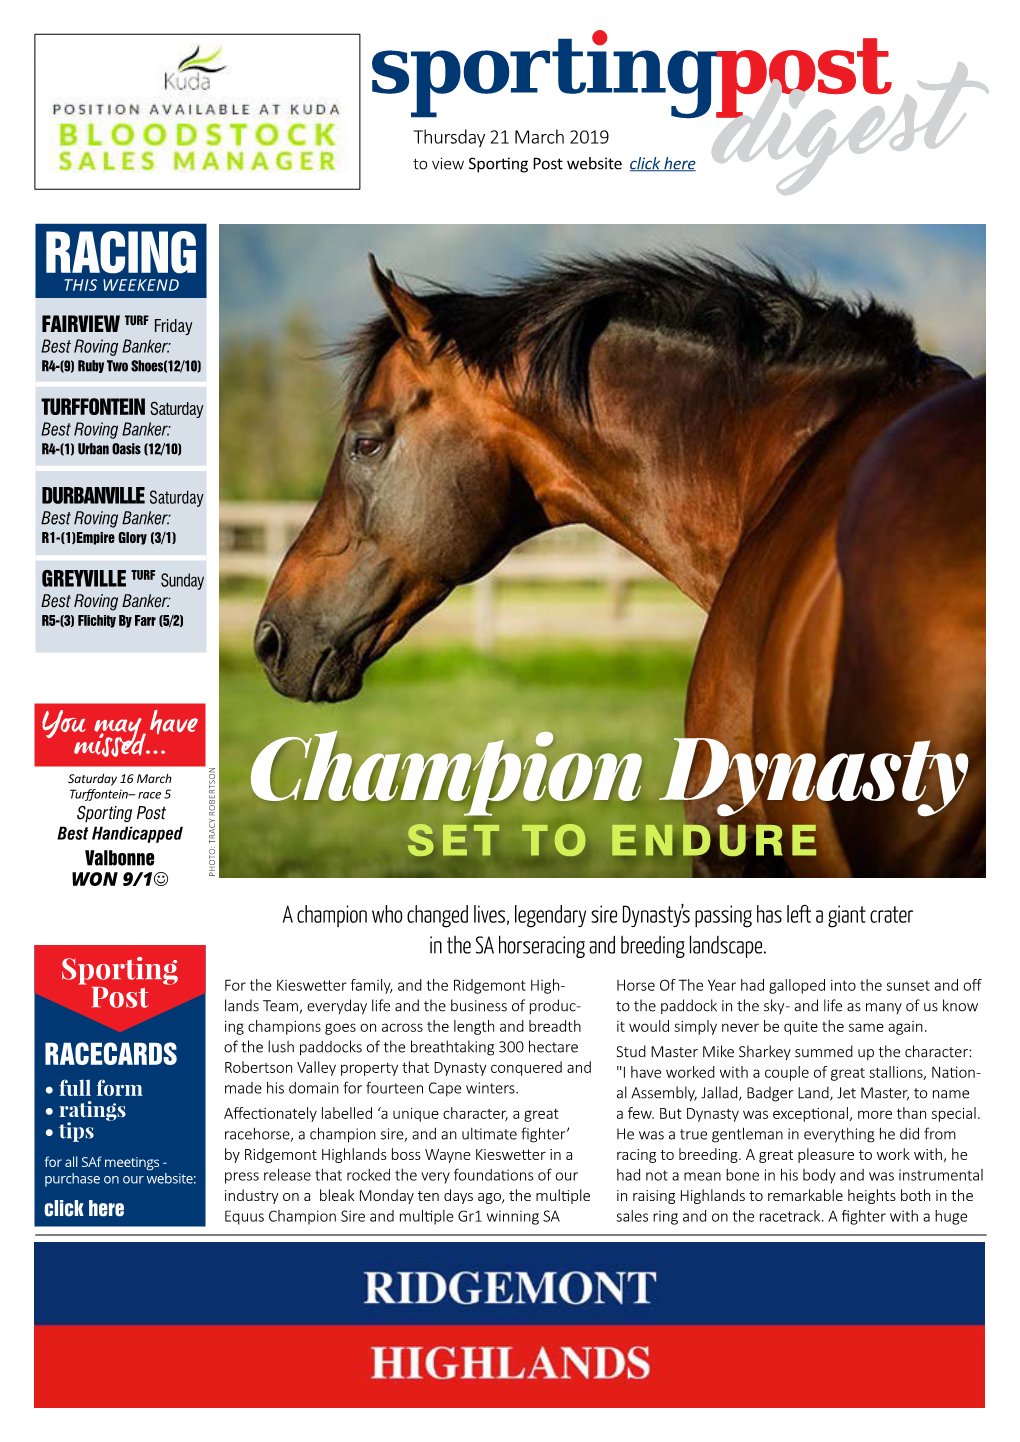 A Champion Who Changed Lives, Legendary Sire Dynasty's Passing